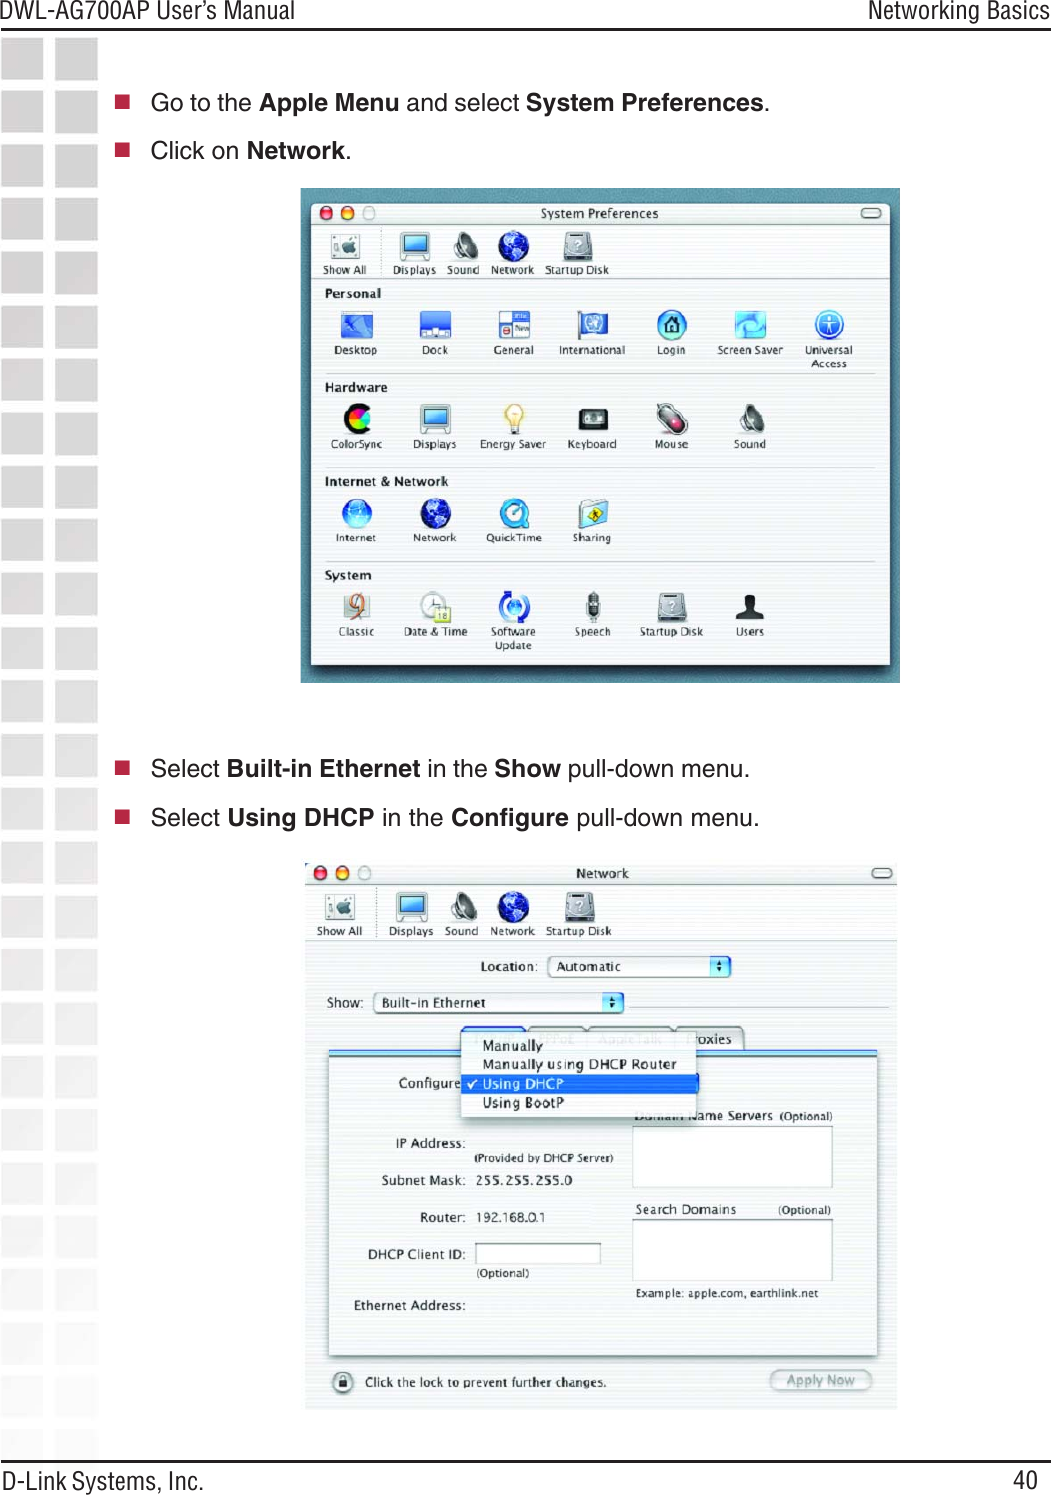 40DWL-AG700AP User’s ManualD-Link Systems, Inc.Networking BasicsGo to the Apple Menu and select System Preferences.Click on Network.Select Built-in Ethernet in the Show pull-down menu.Select Using DHCP in the Configure pull-down menu.